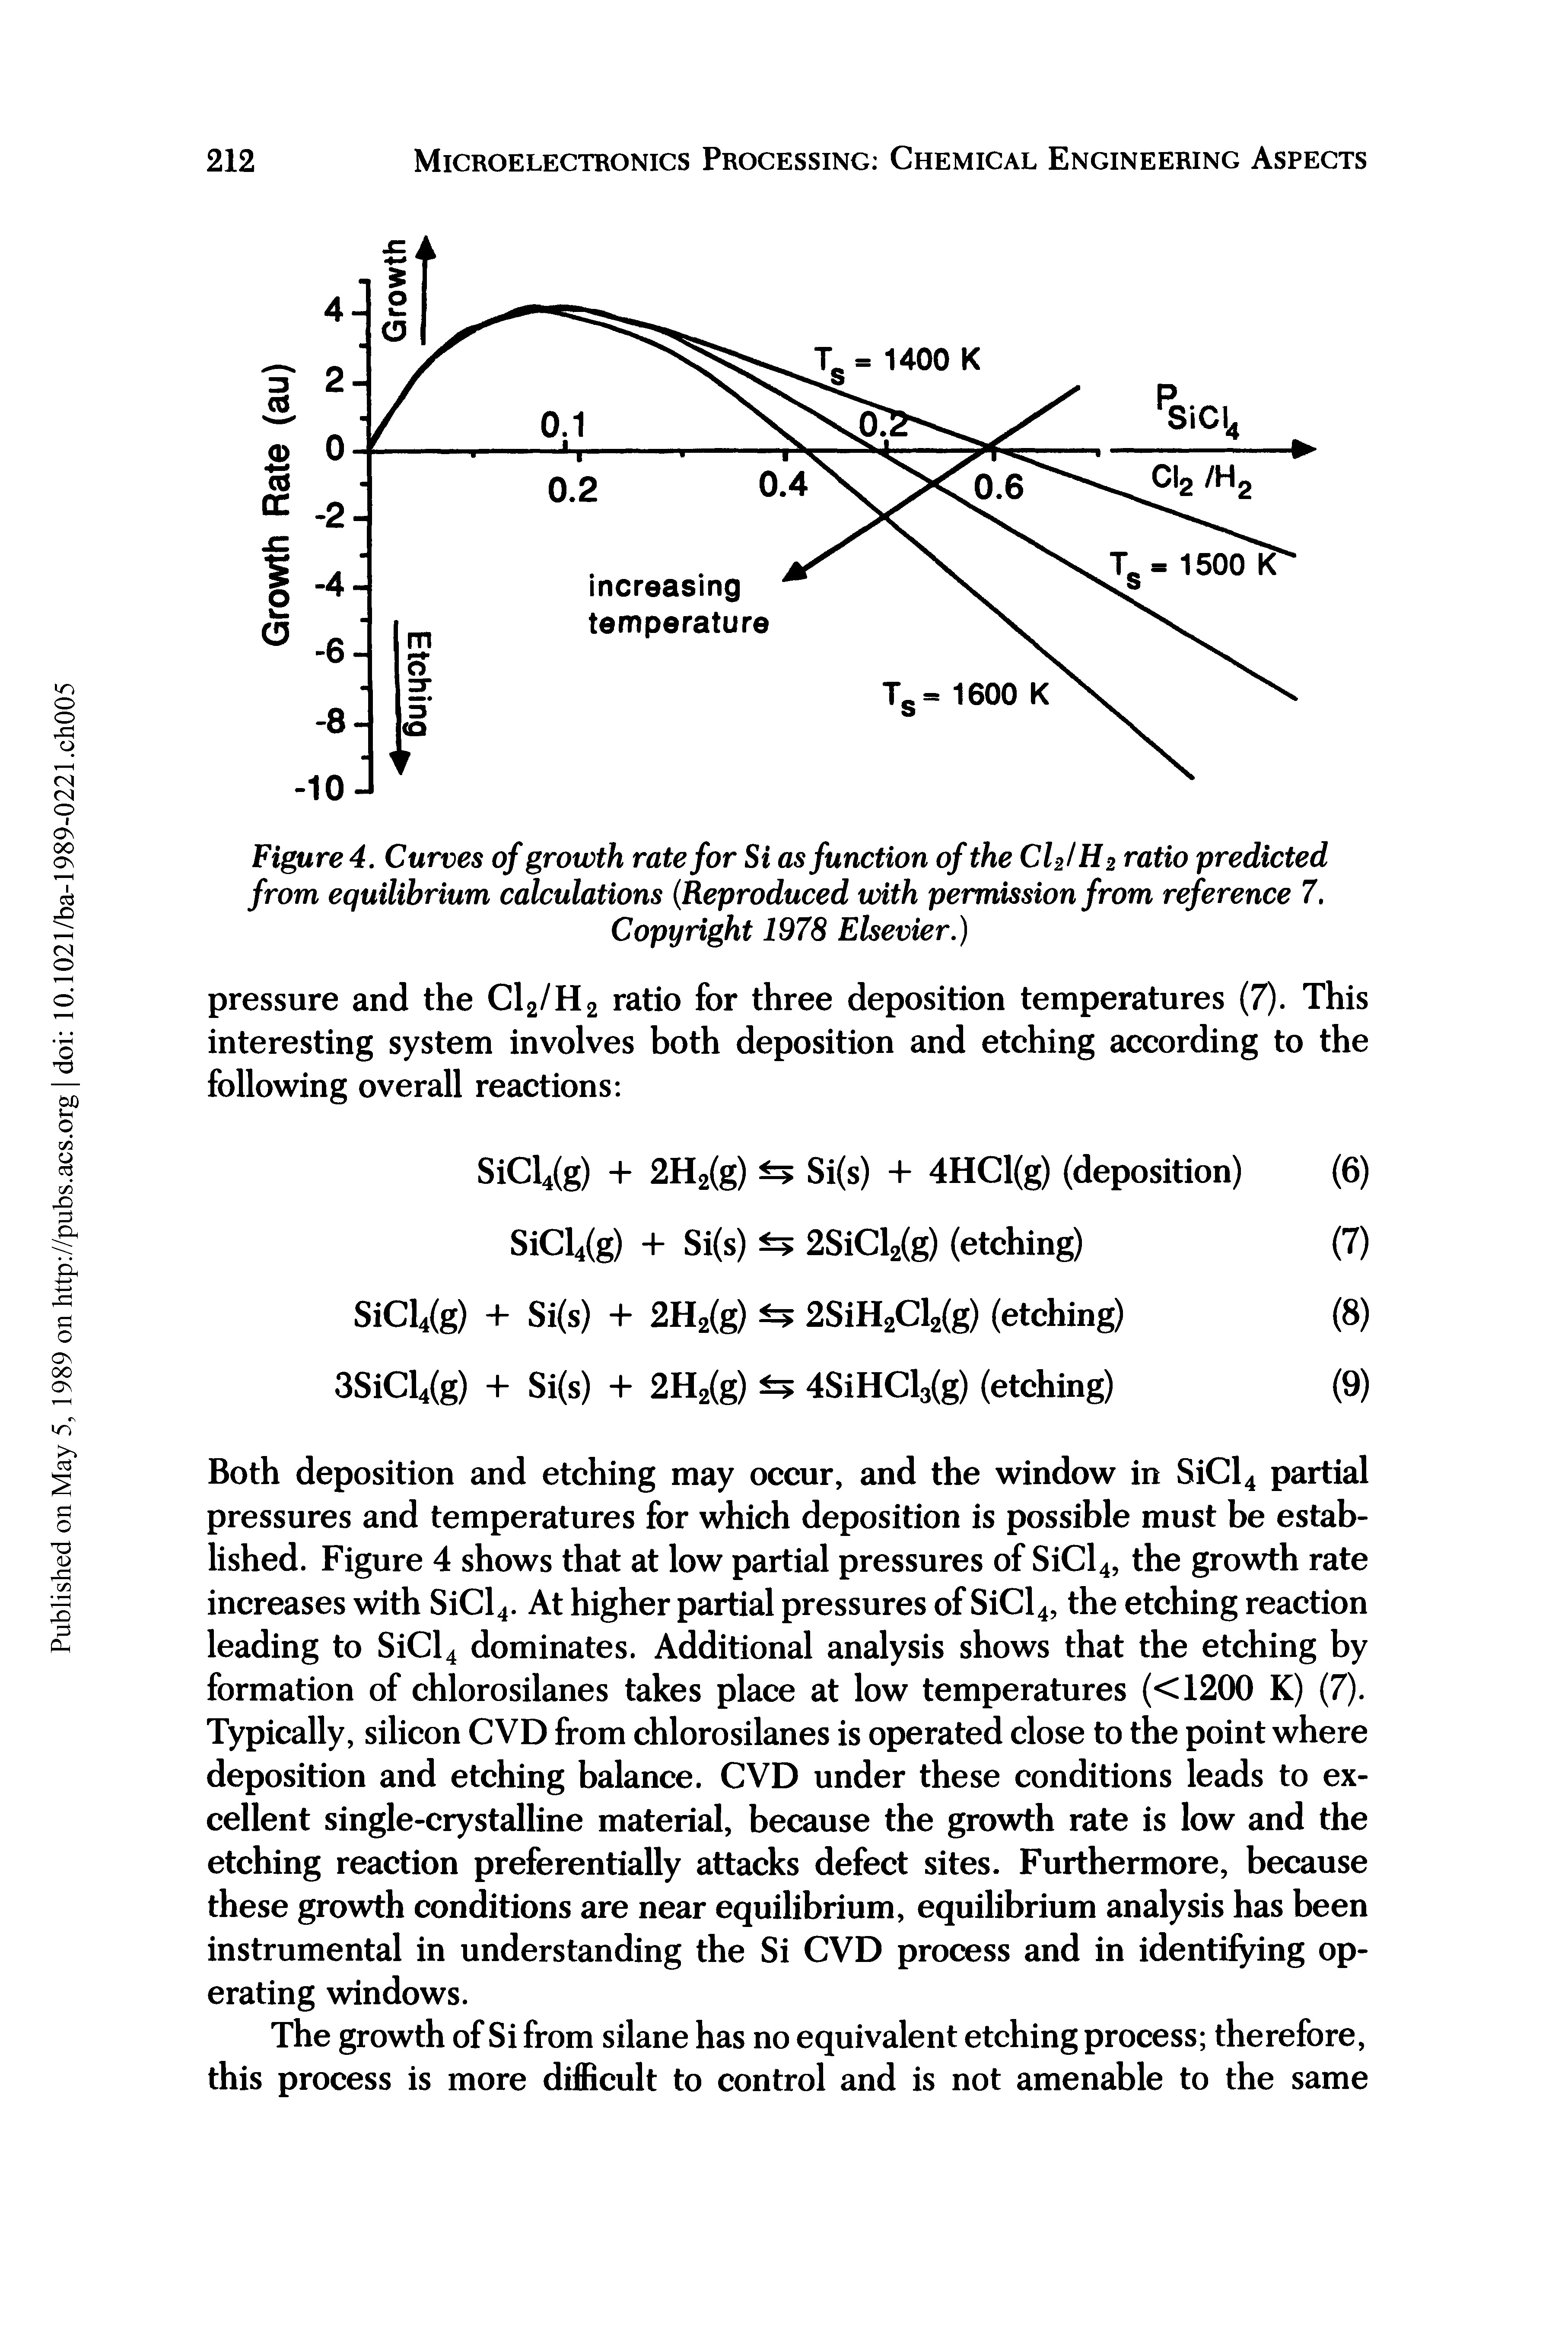 Figure 4. Curves of growth rate for Si as function of the Cl2lH2 ratio predicted from equilibrium calculations (Reproduced with permission from reference 7. Copyright 1978 Elsevier.)...